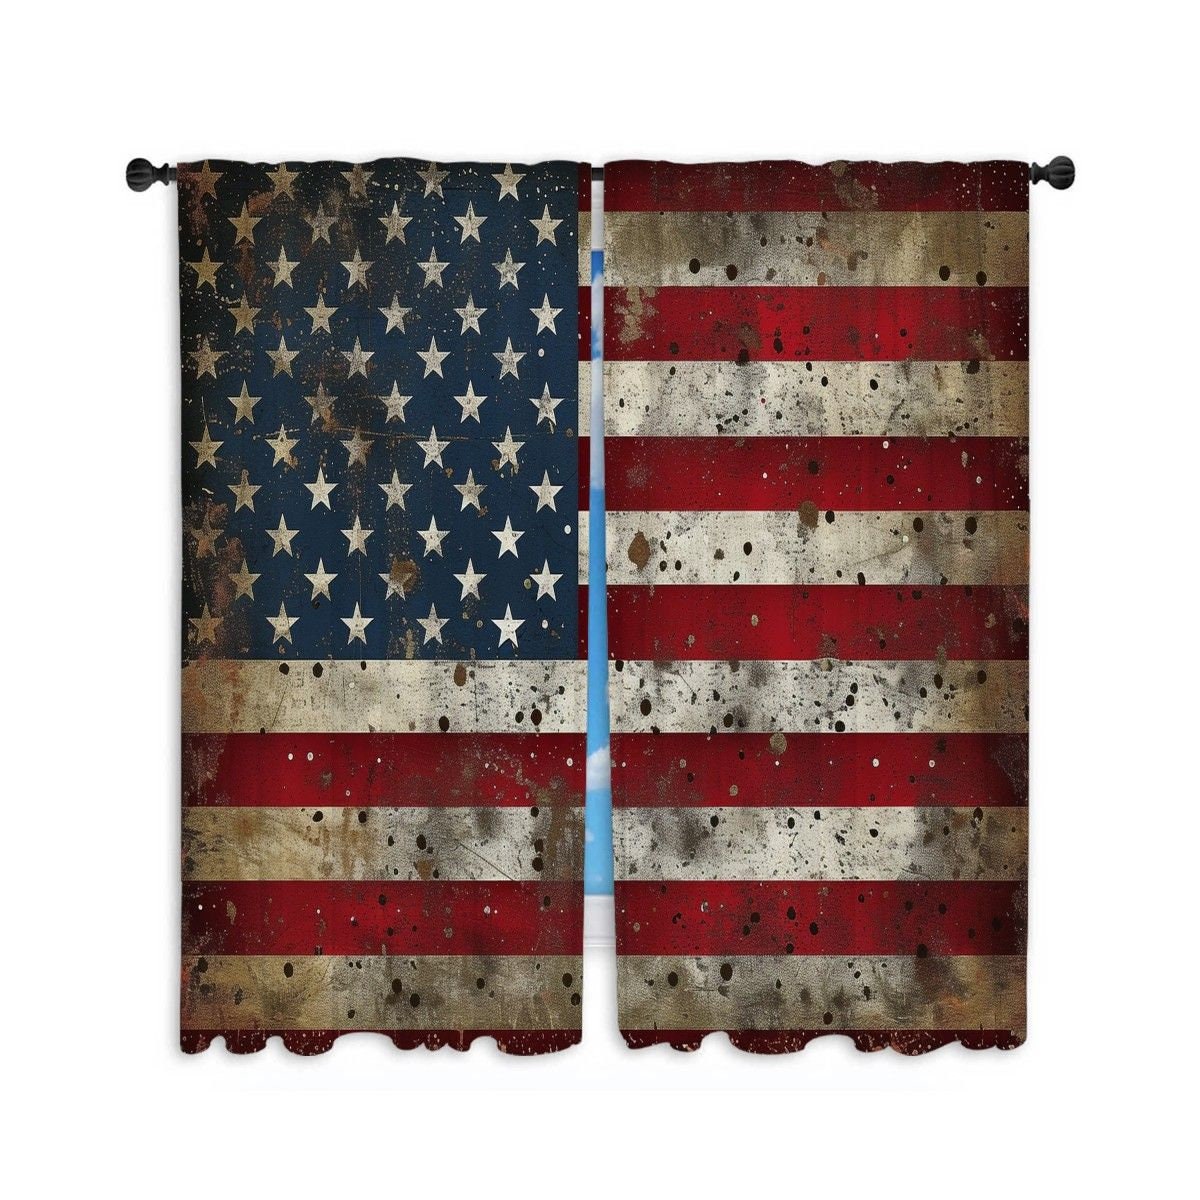 Vintage American Flag Window Curtain,Men 3D Bass Fish Curtains,Hunting  Fishing Window Treatment Curtain for Kids Boys Adult Room Decor,Rustic